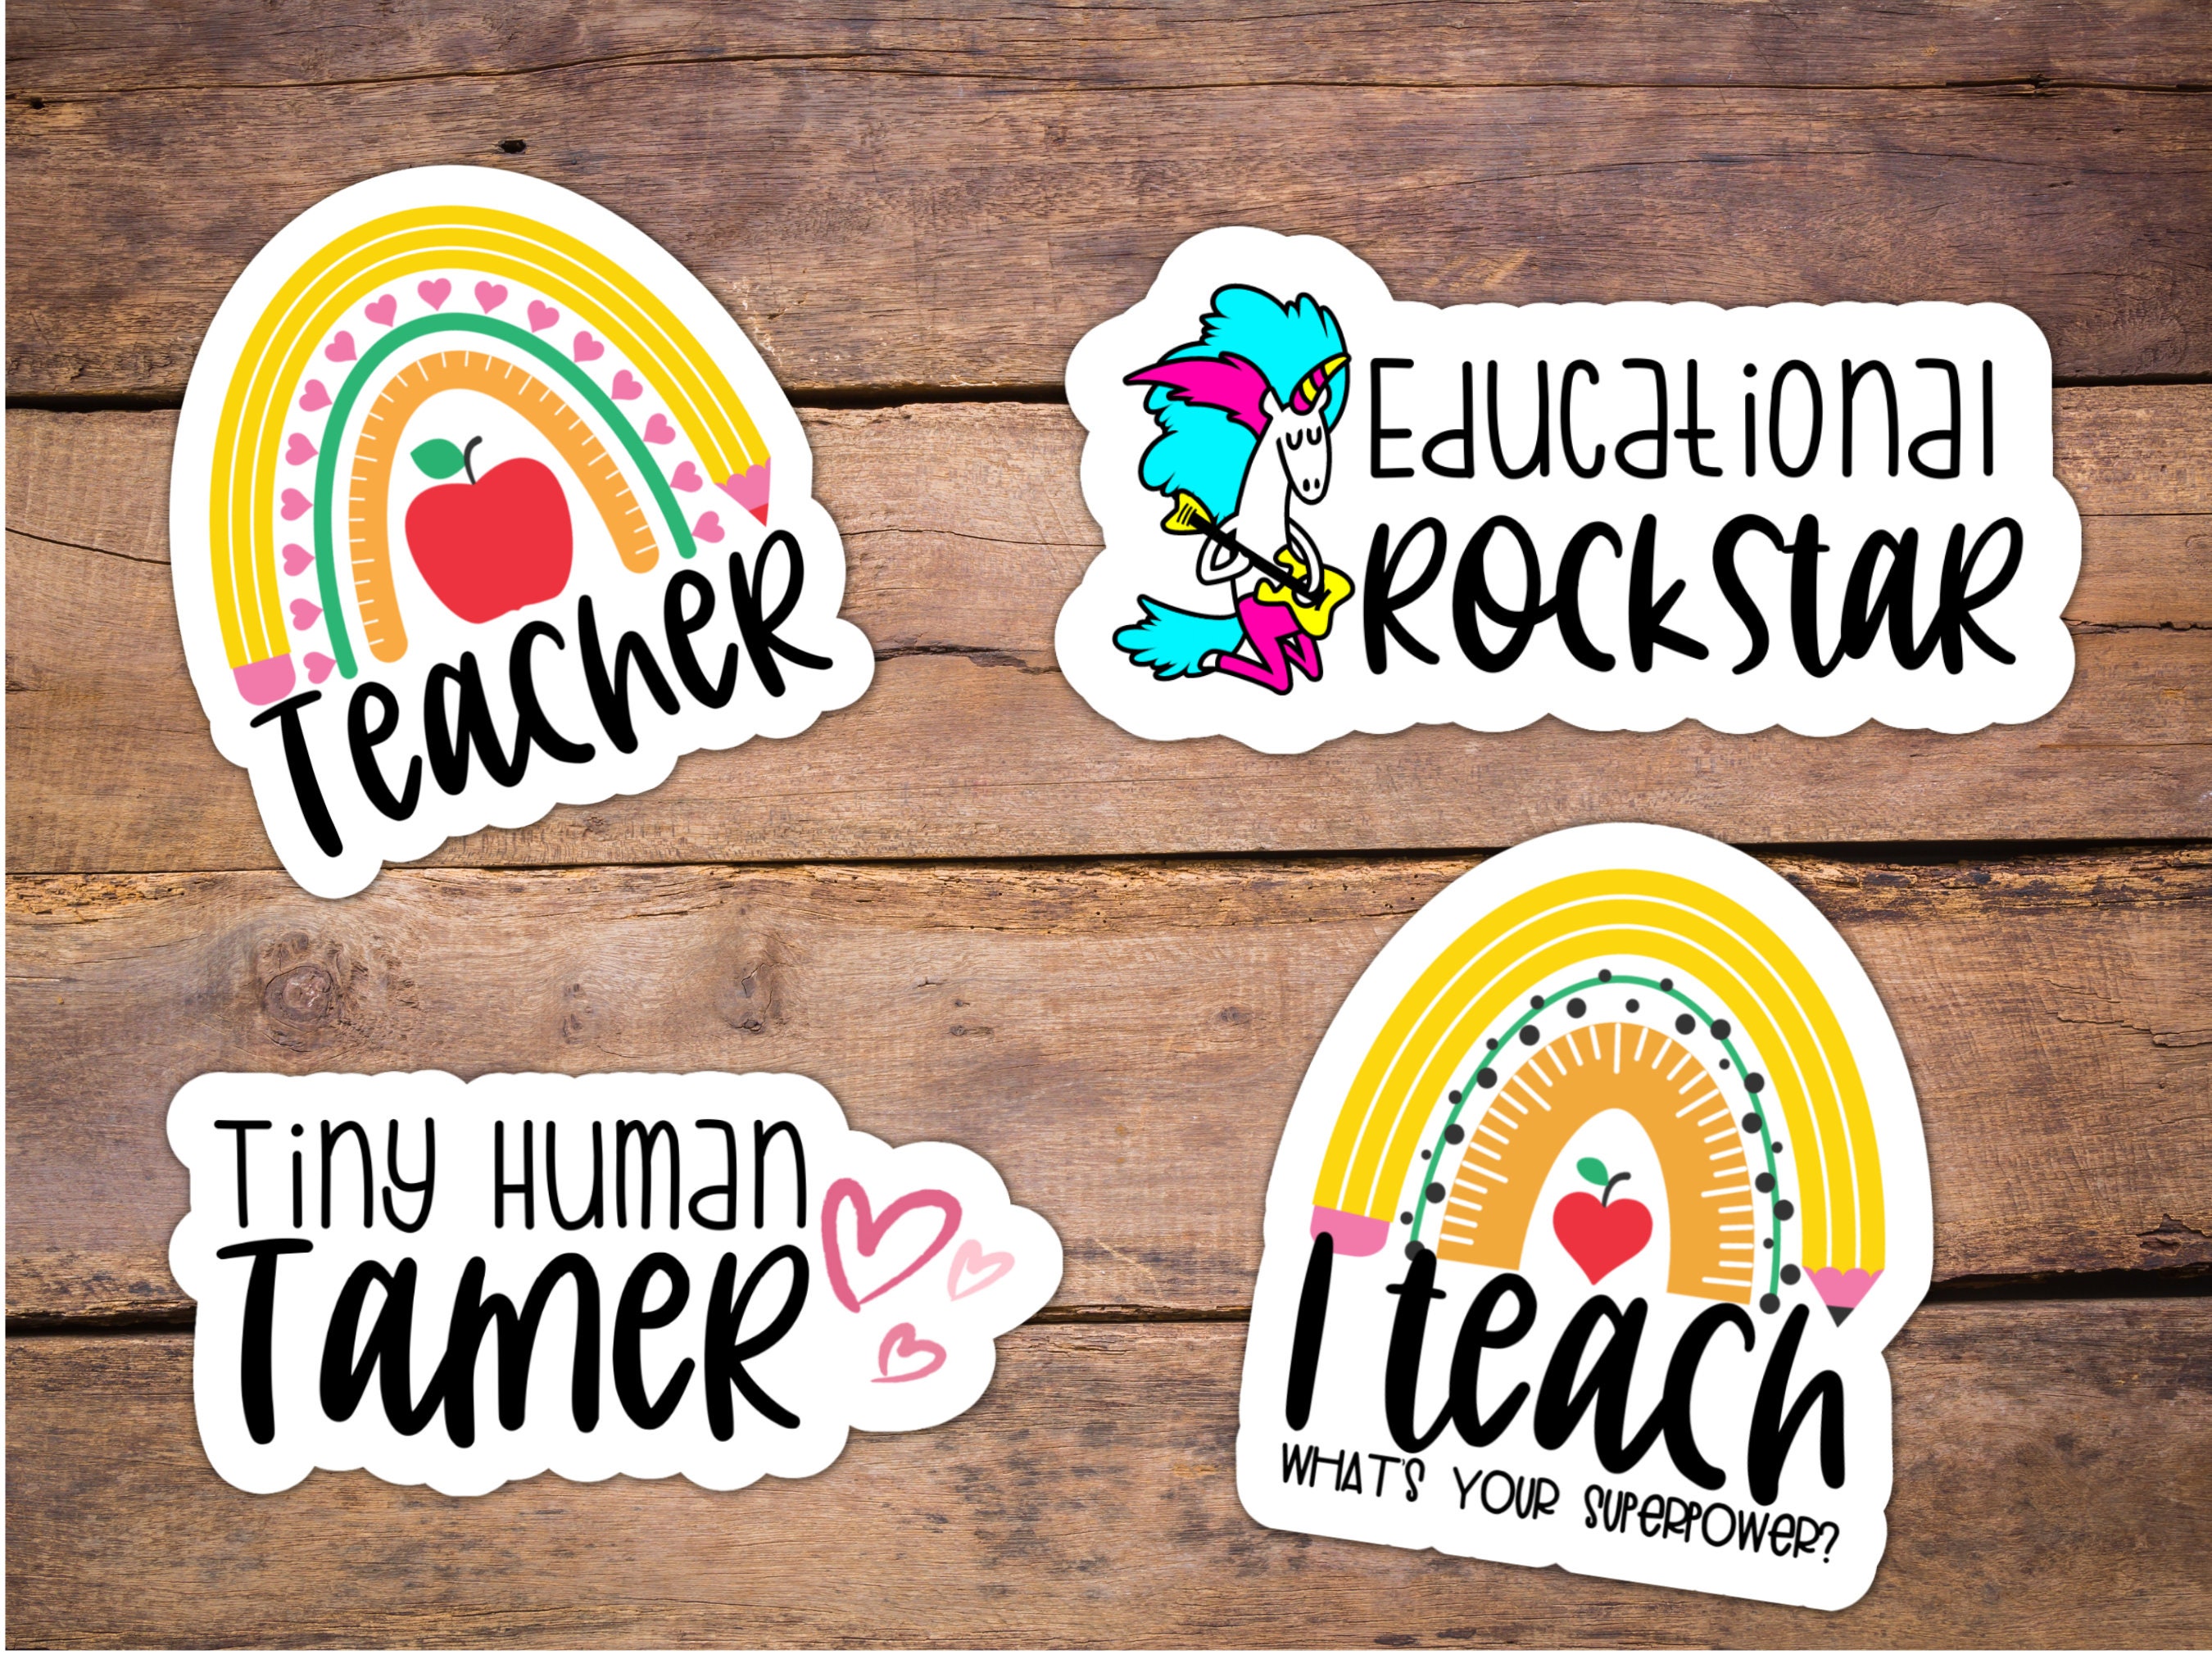 Therapist and Teacher Stickers Bundle Graphic by Pixtordesigns